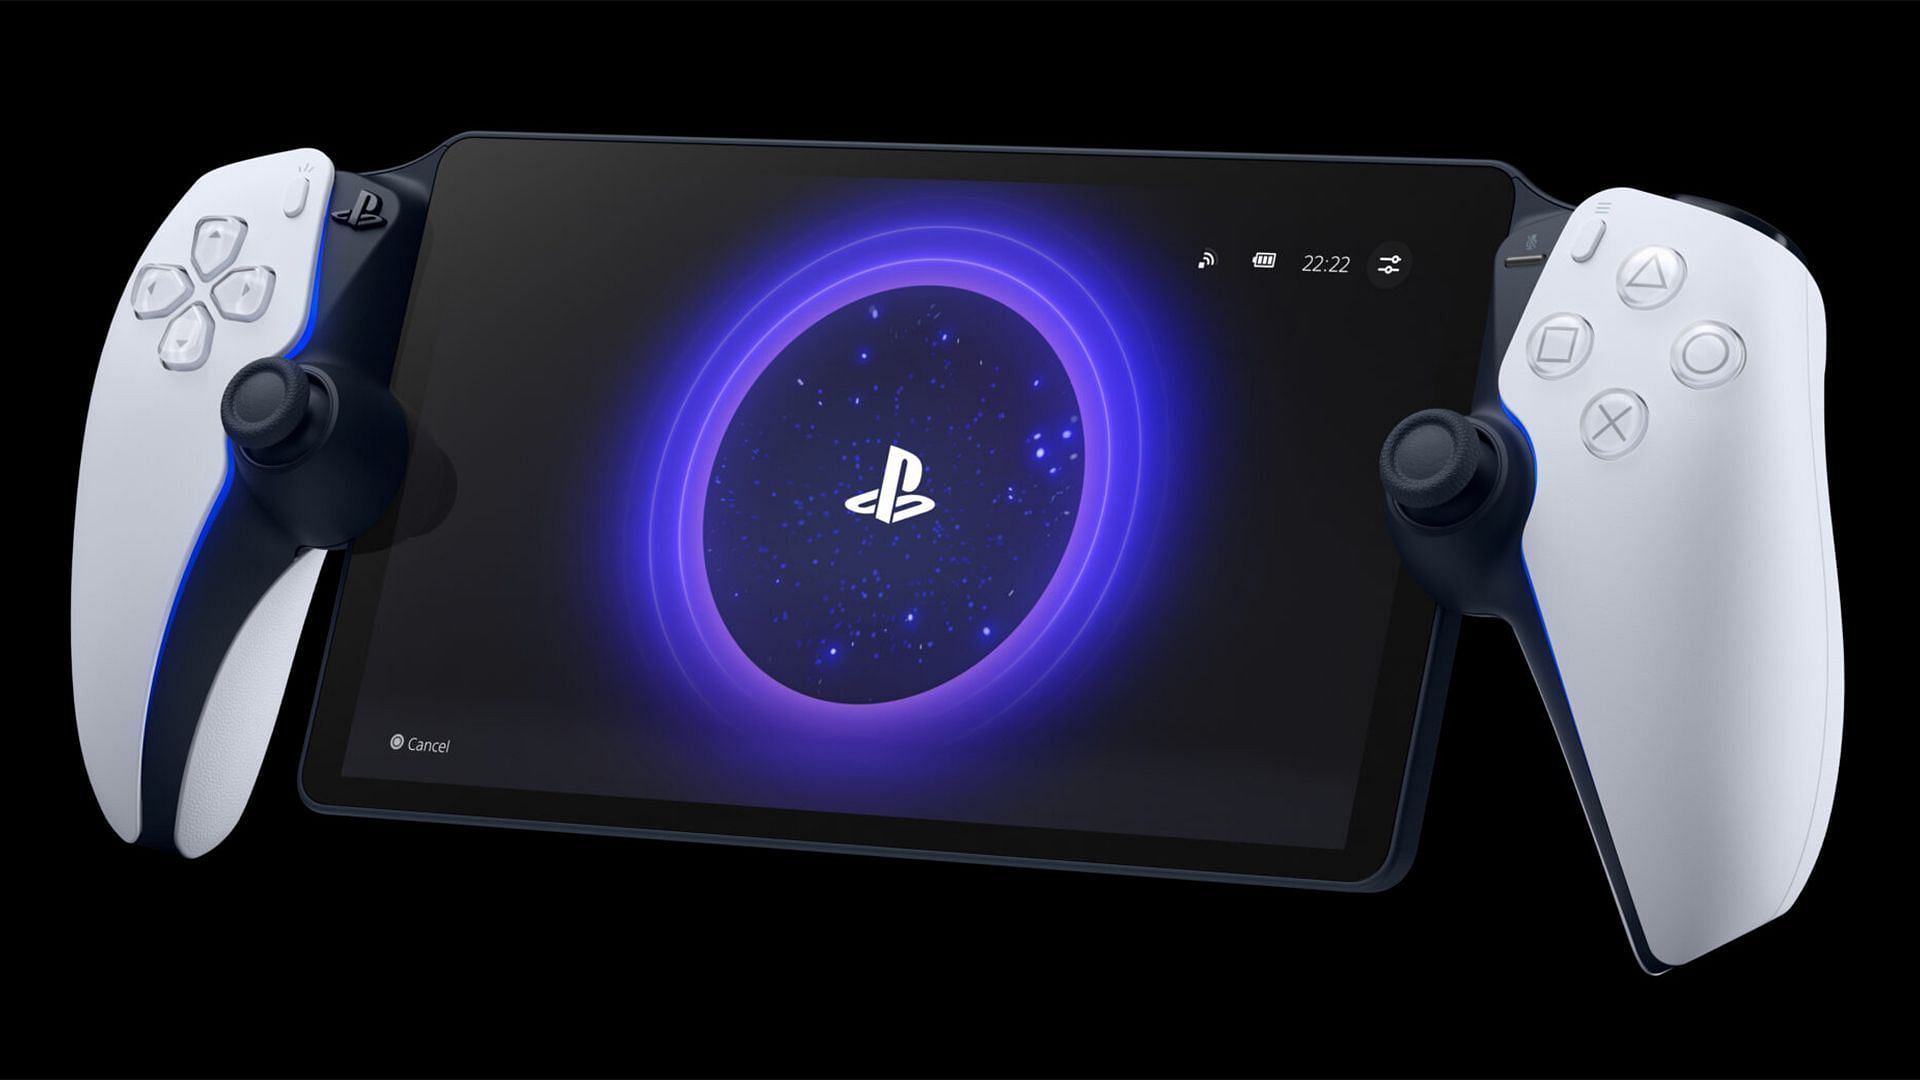 The PlayStation Portal is launching for $200 later this year (Image via Sony)